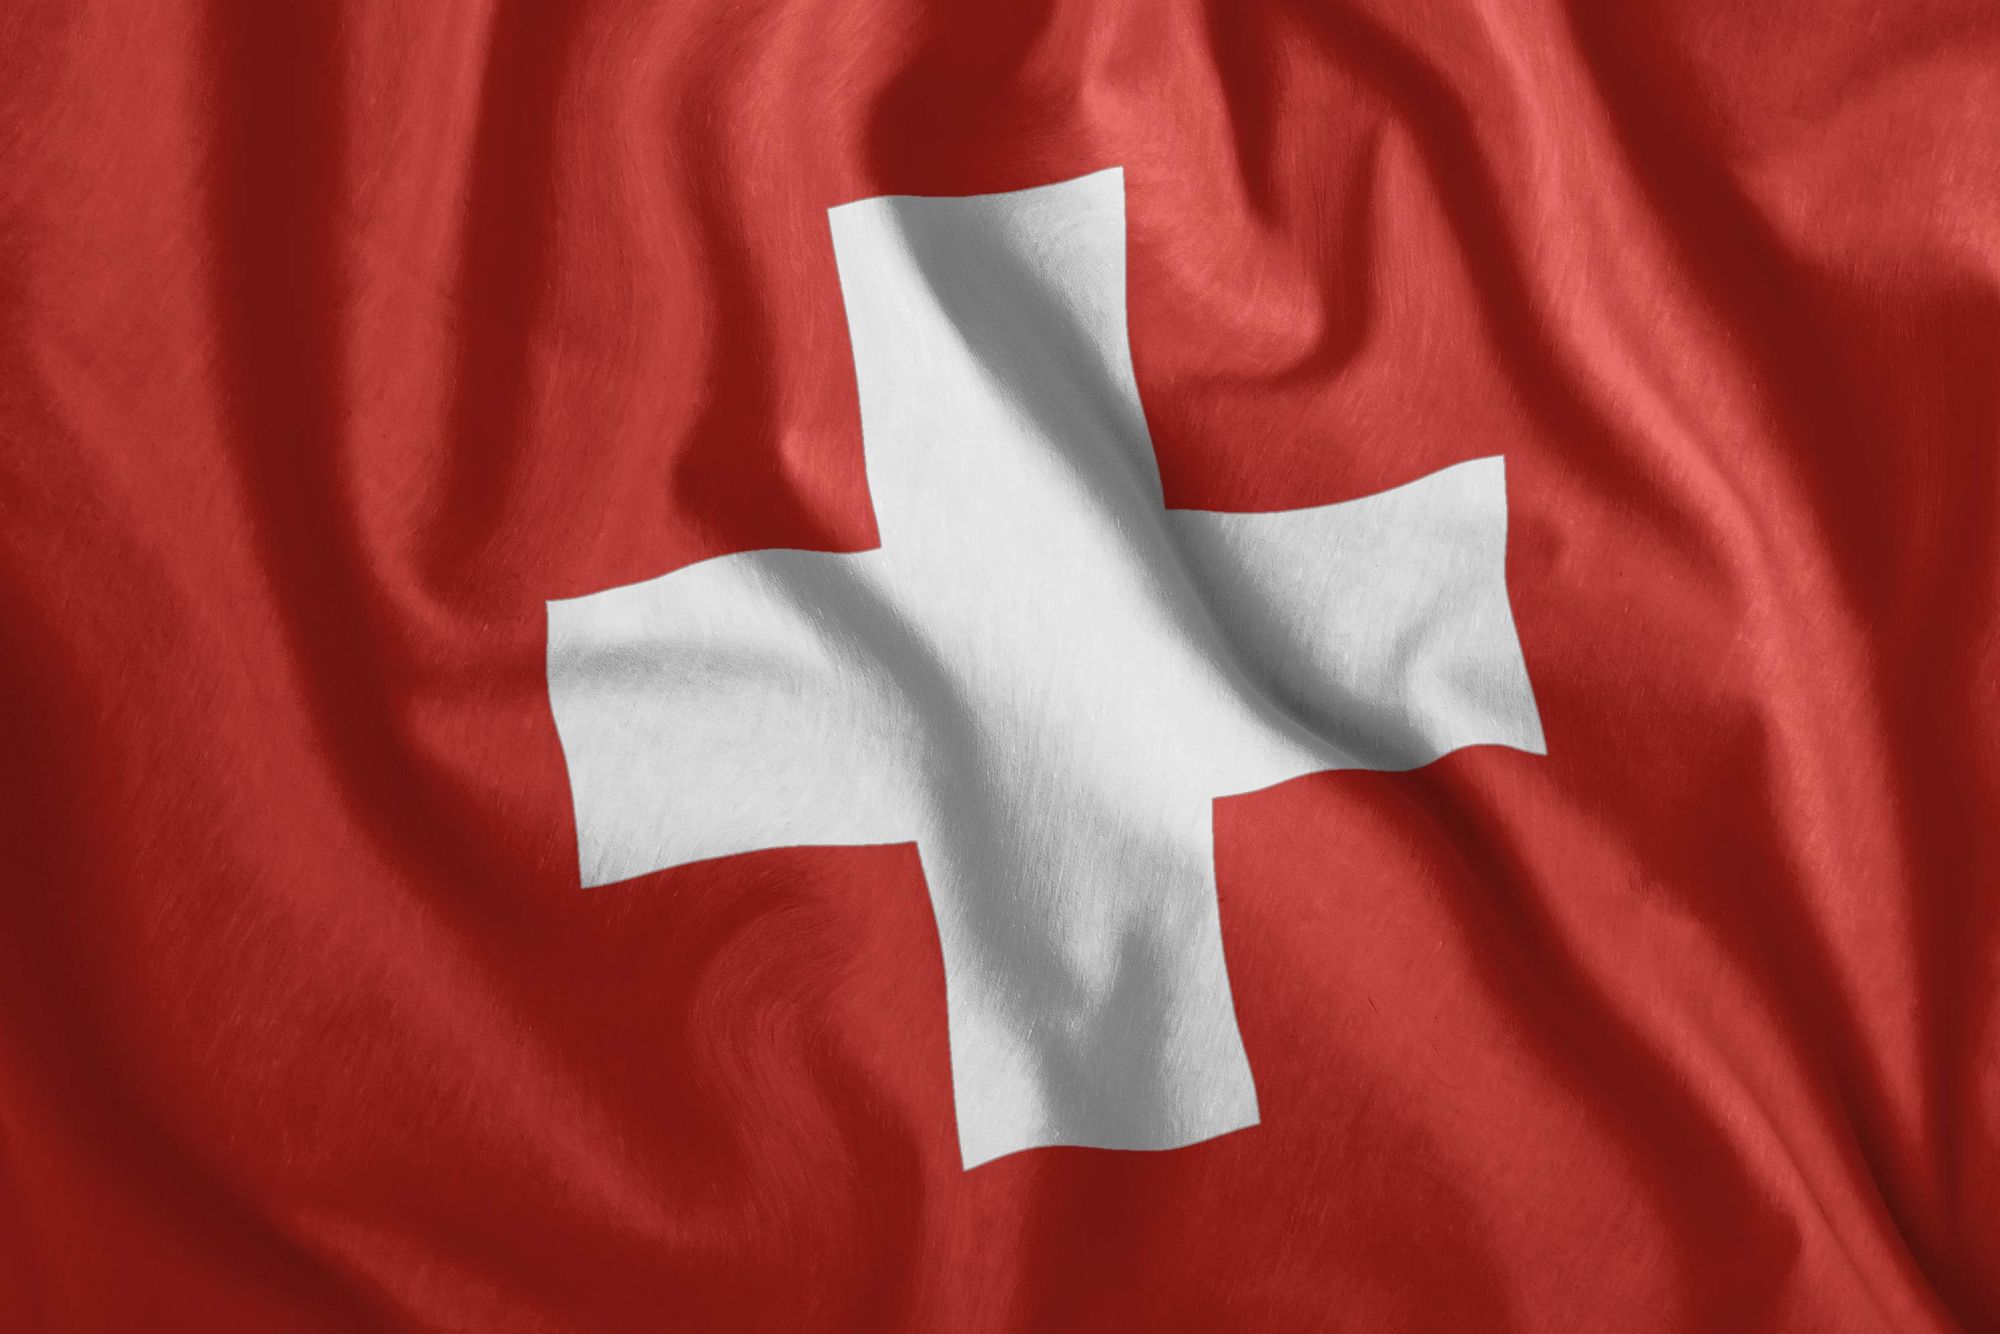 Clients of the Swiss Sygnum Bank AG can participate in Ethereum 2.0 staking